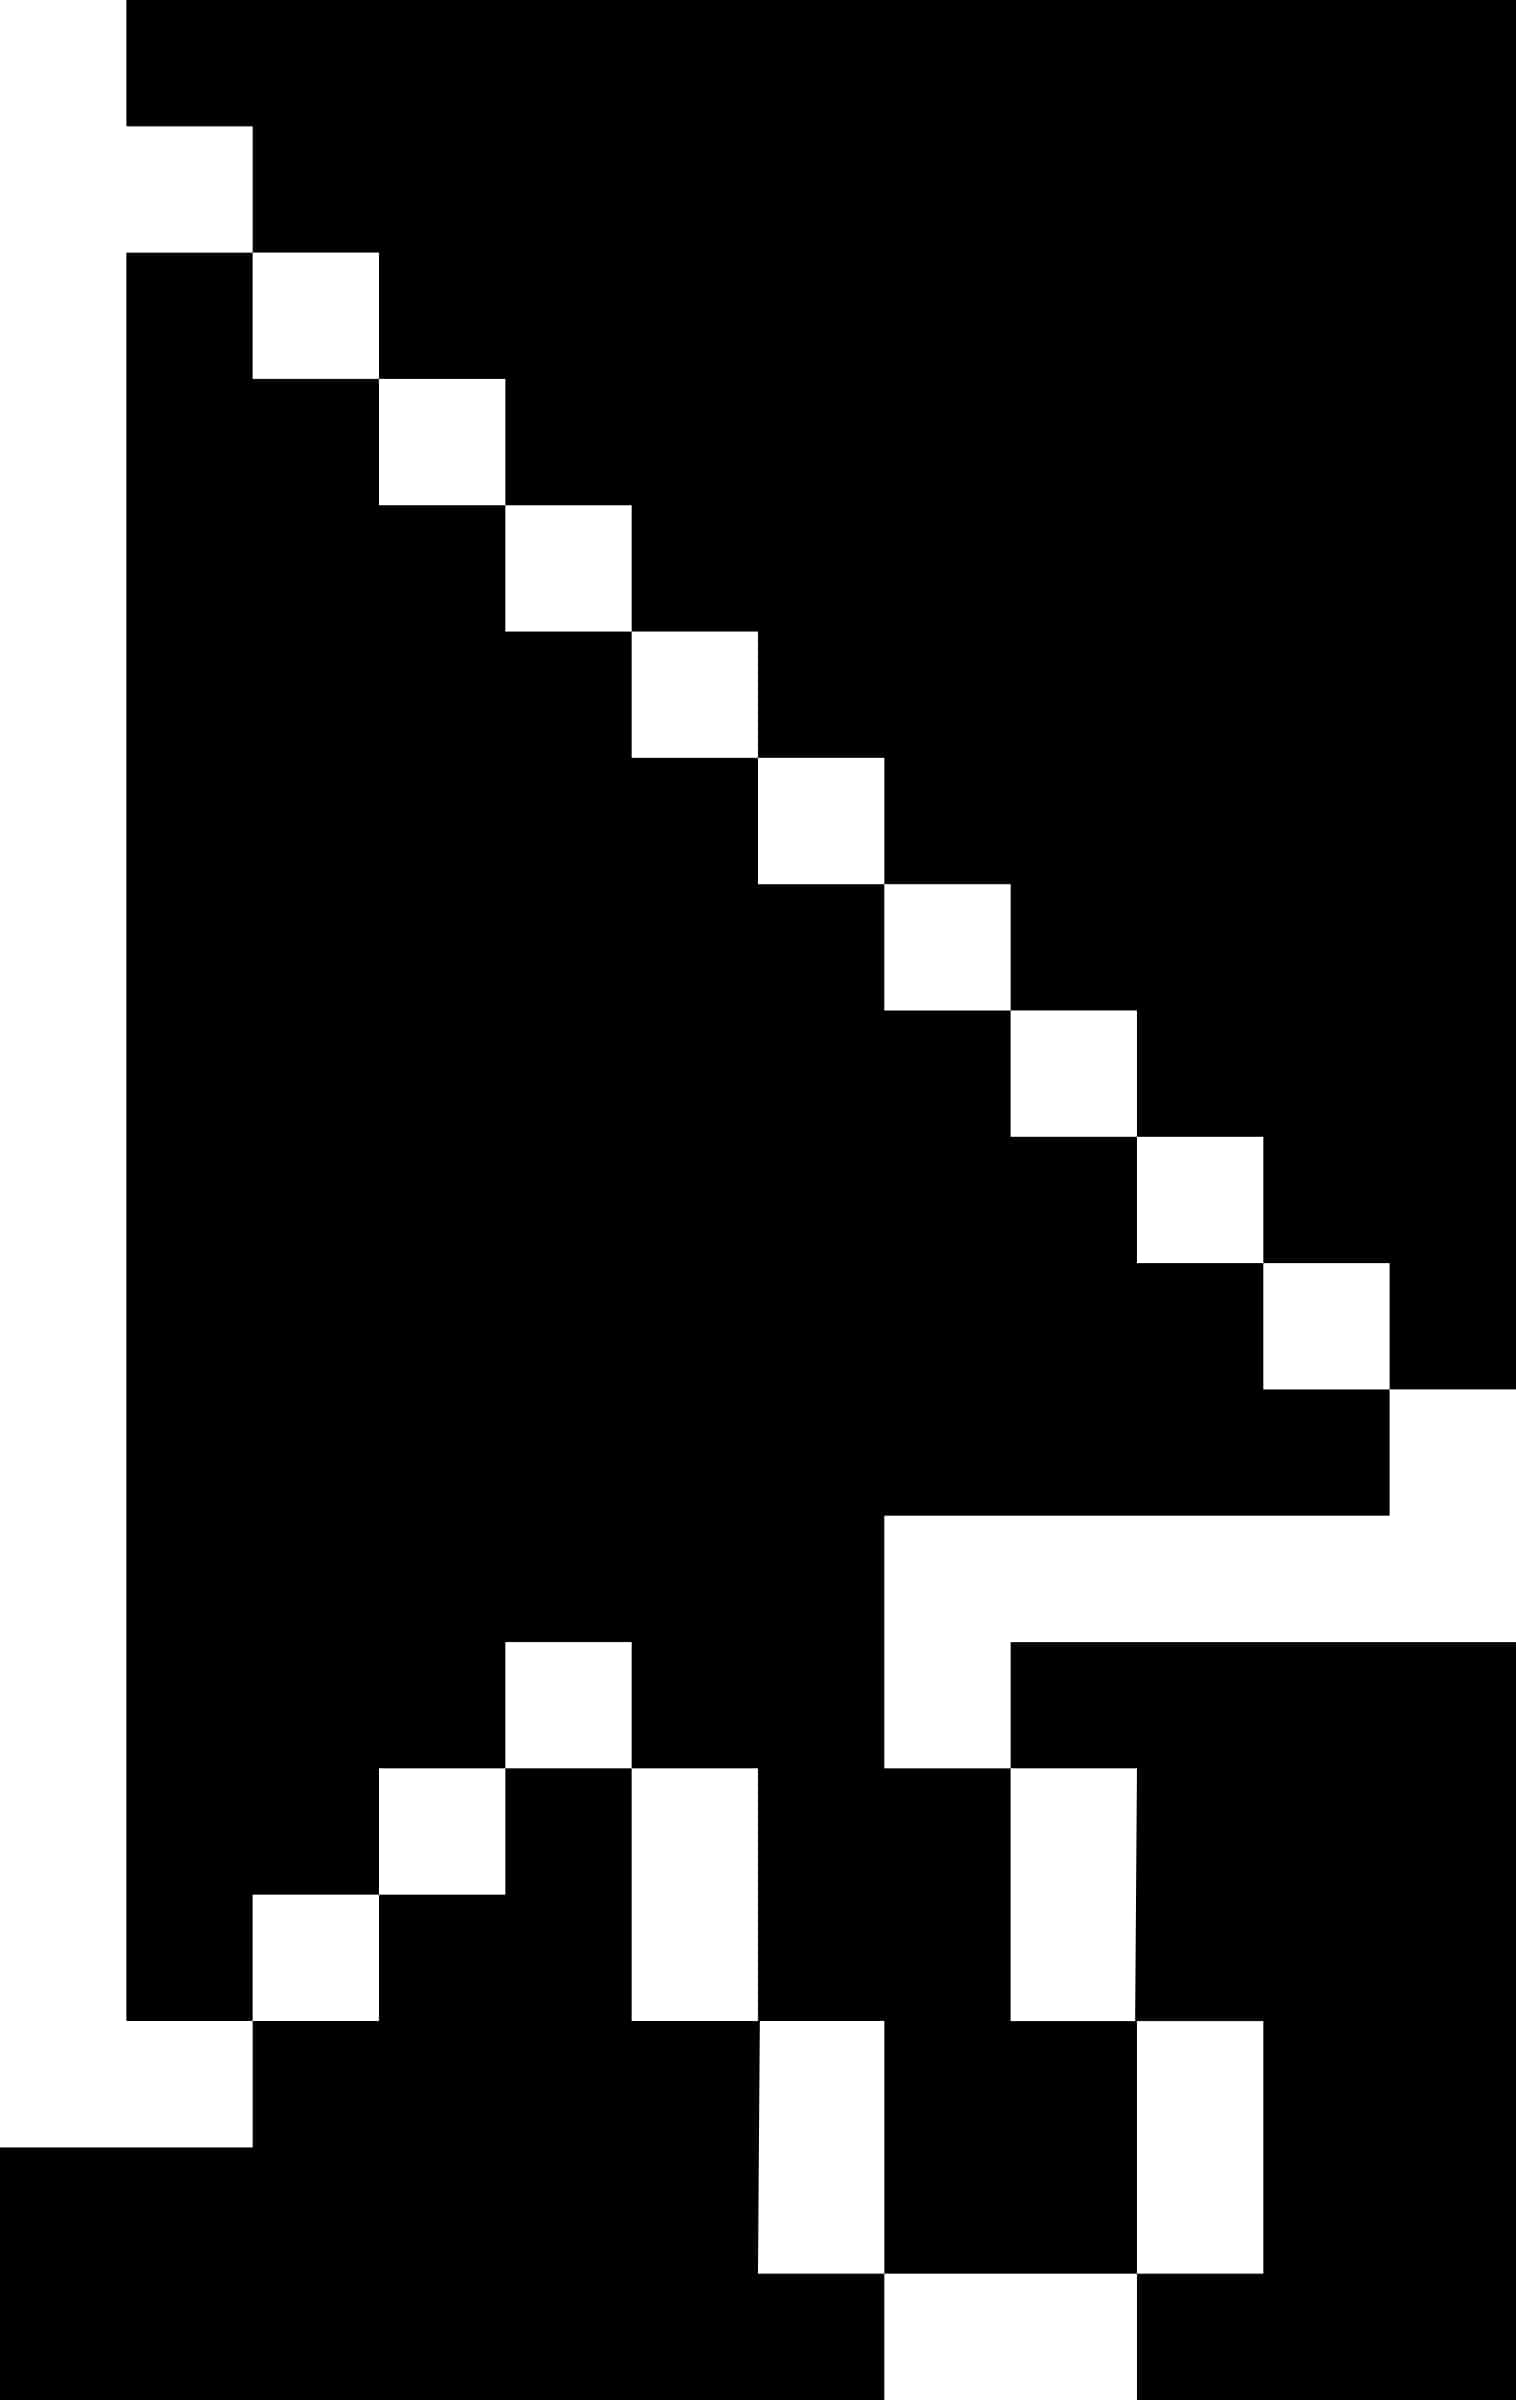 A Black And White Pixelated Arrow